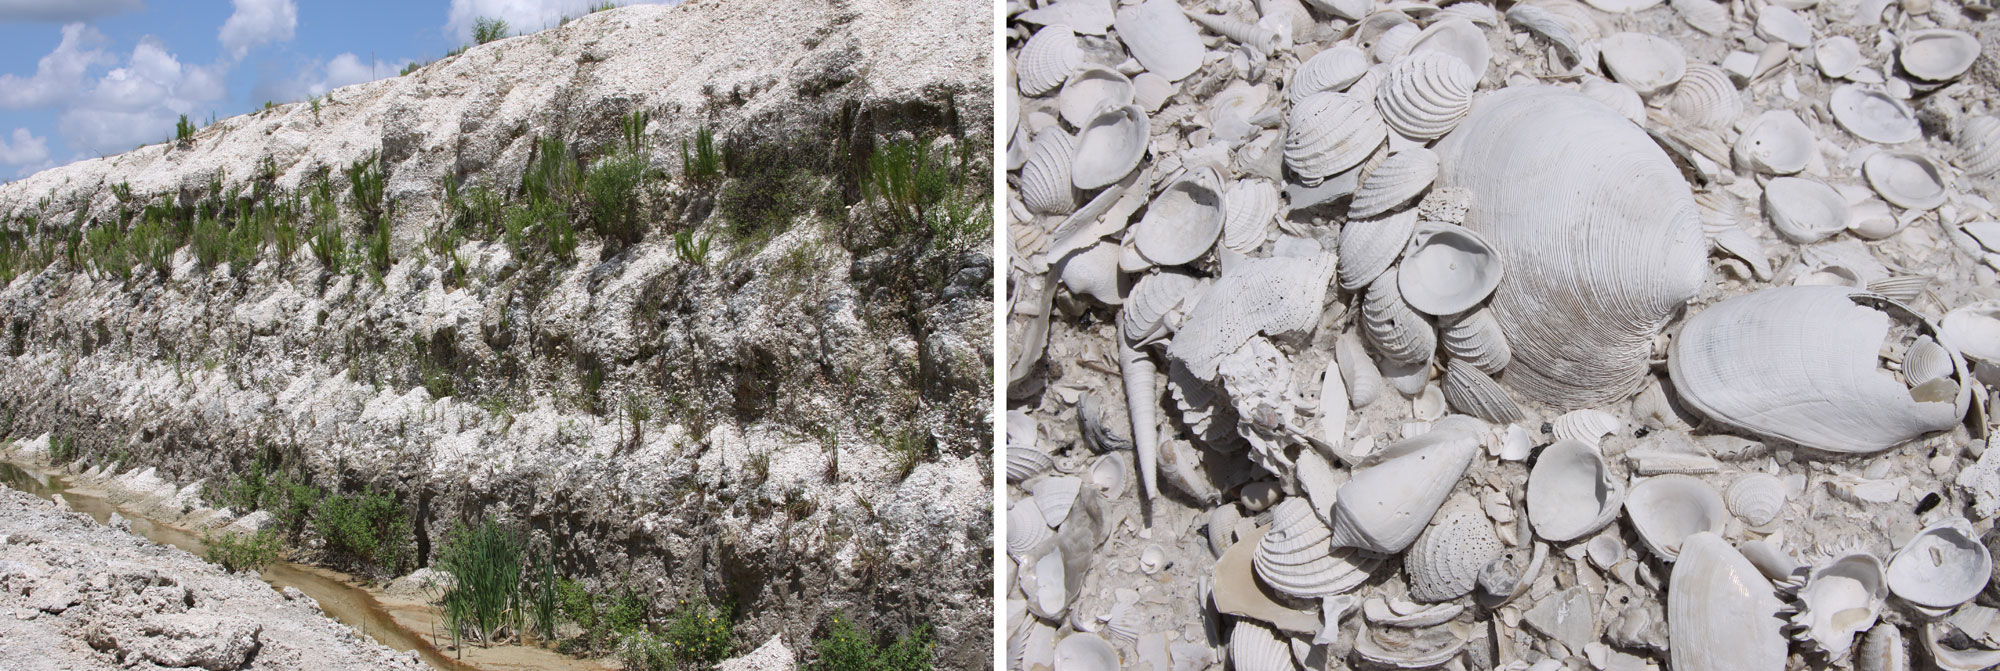 2-Panel figure showing photos of shell deposits in Florida. Panel 1: Quarry wall showing layers of shells. Panel 2: Close up of shells making up the deposit showing many bivalves and a few gastropods.